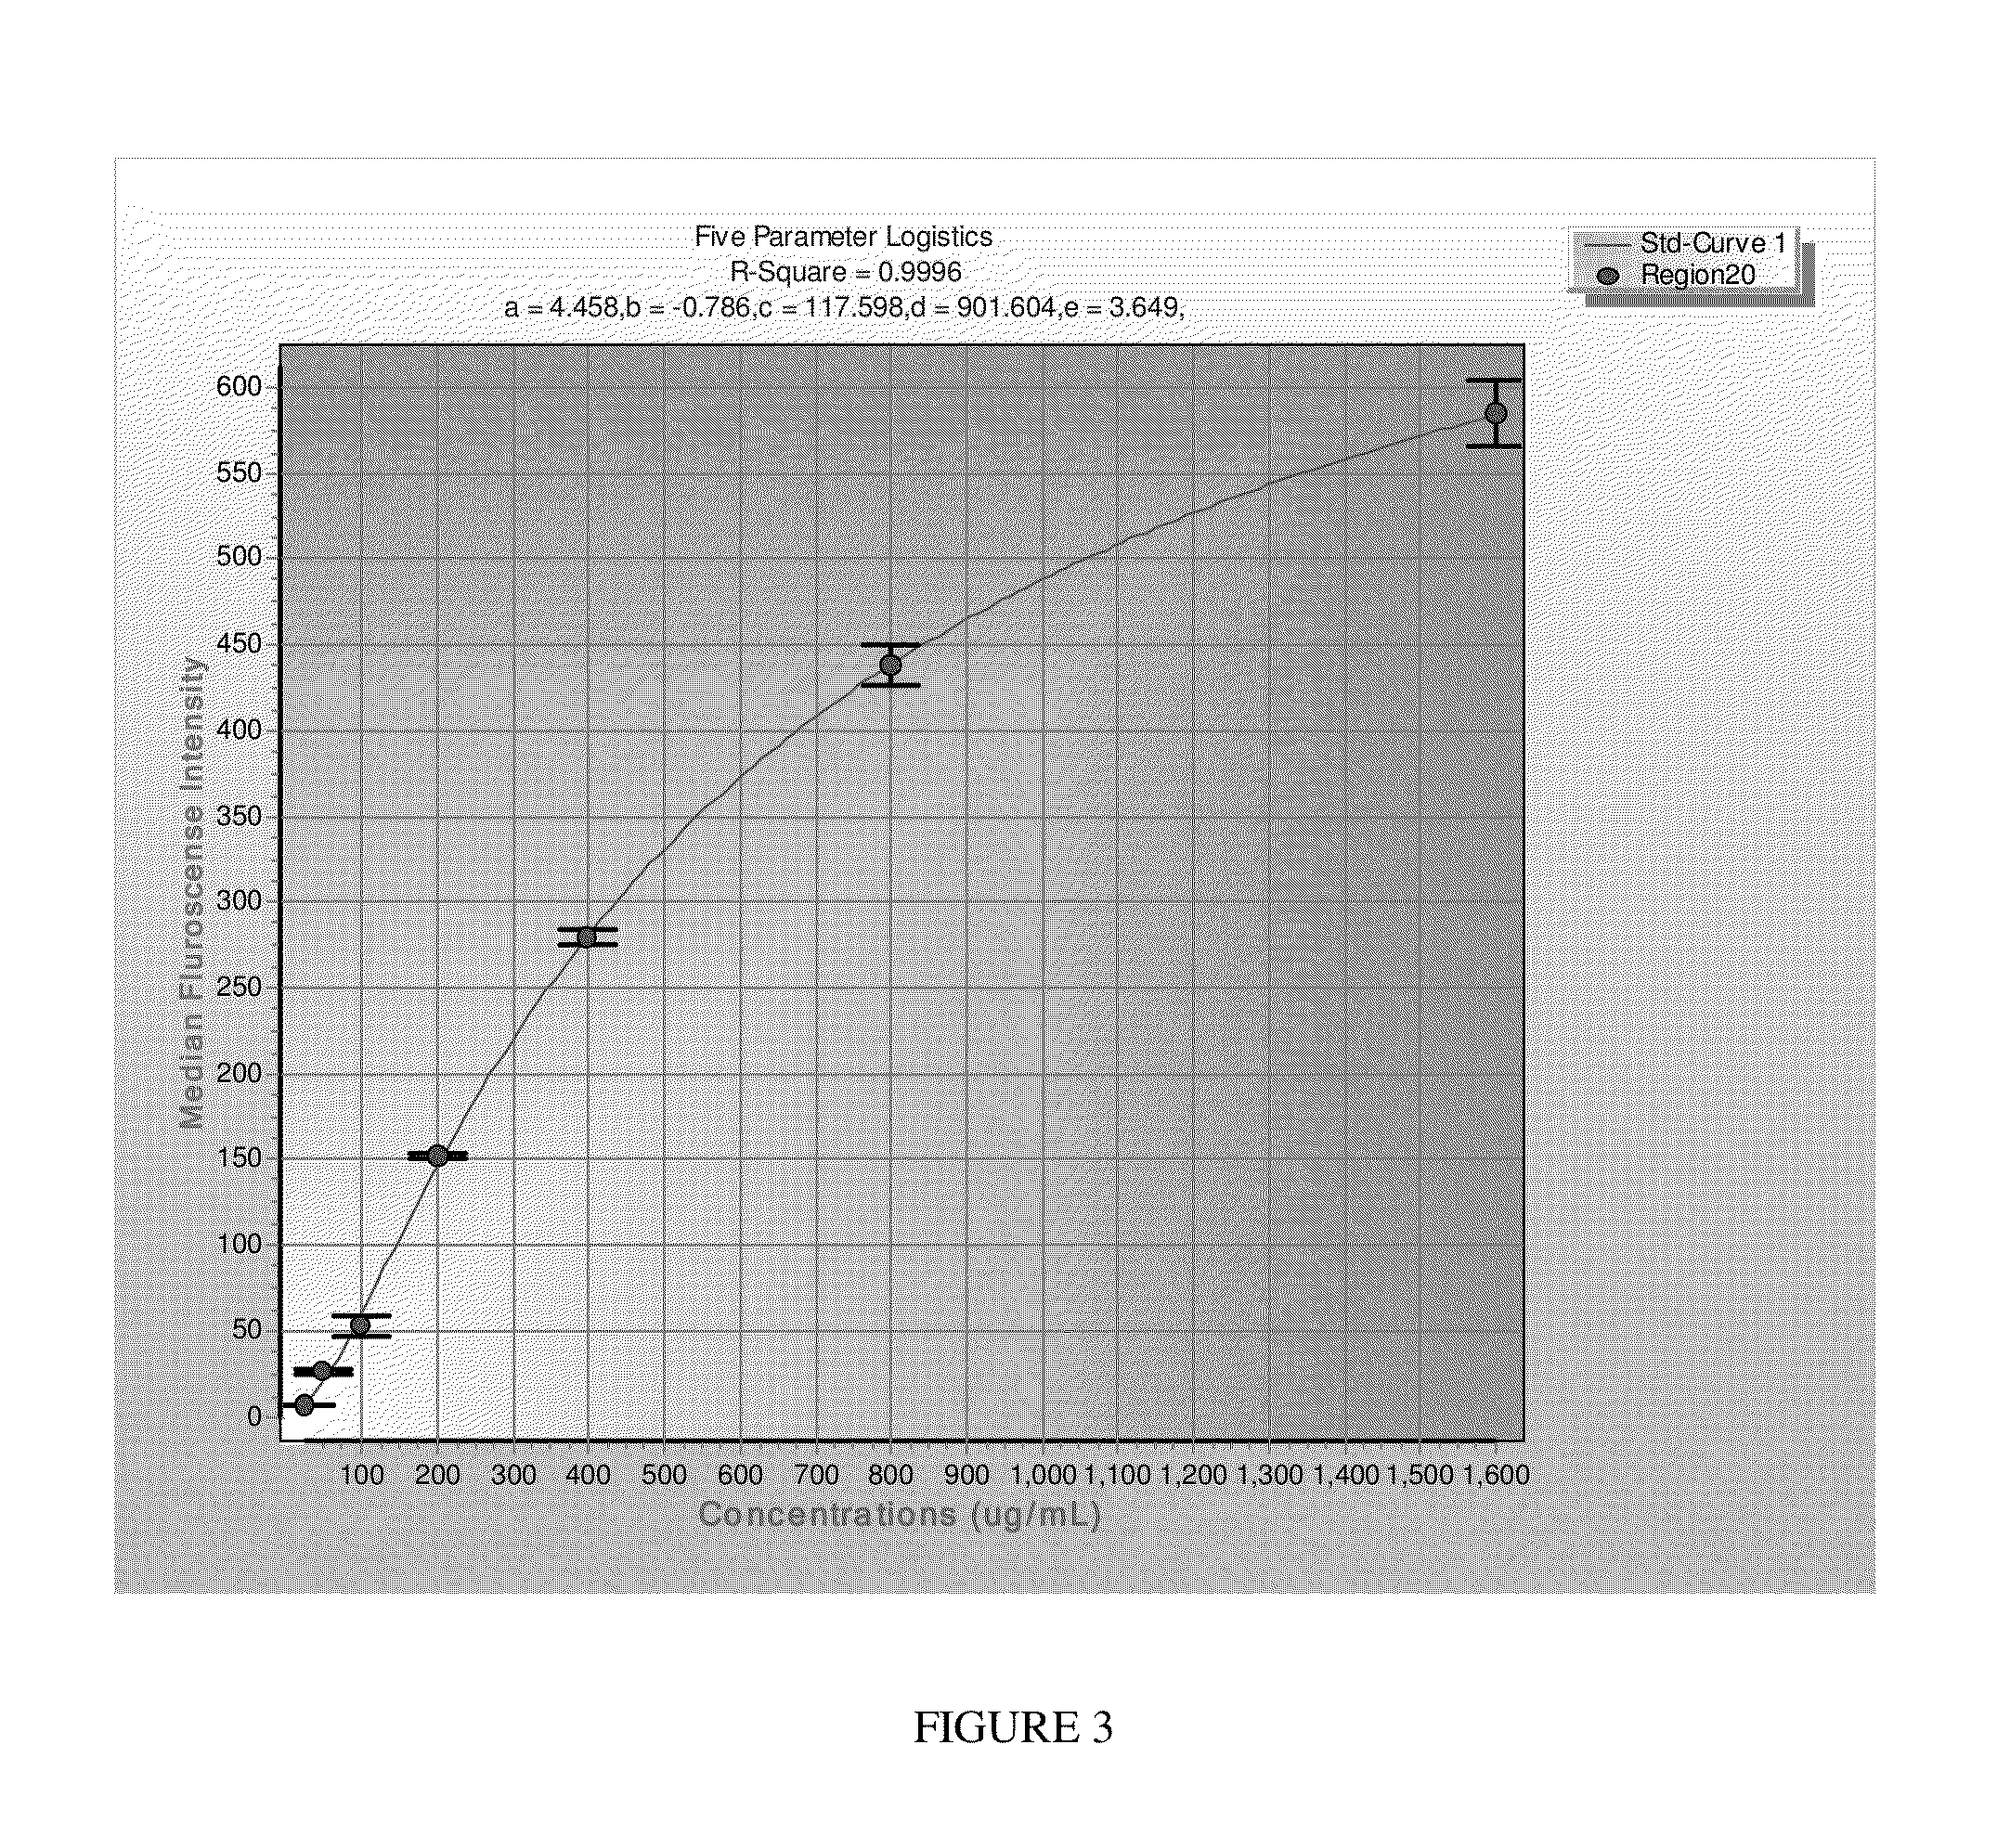 System and Method for Quantifying Fragile X Mental Retardiation 1 Protein in Tissue and Blood Samples